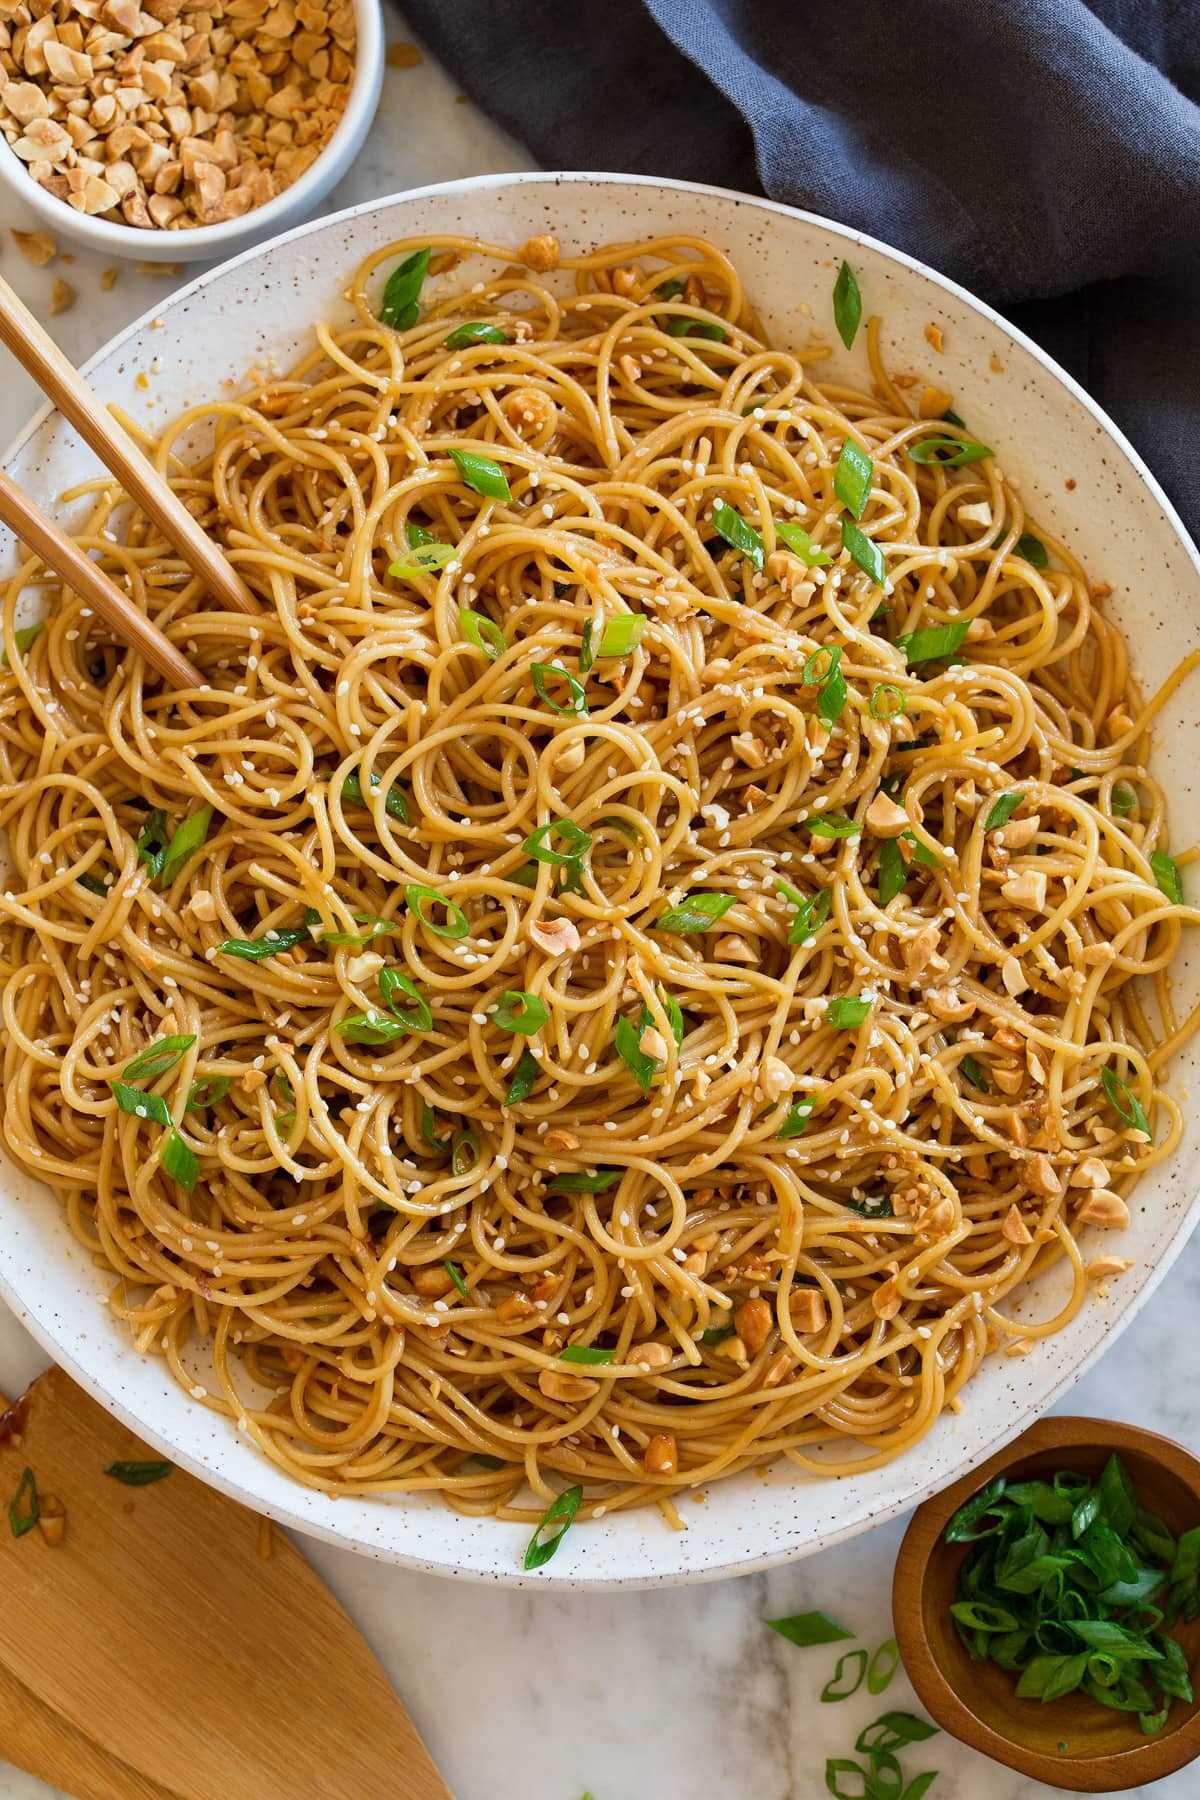 Photo: Bowl of sesame noodles topped with peanuts, sliced green onions and sesame seeds. Shown overhead in a white bowl with a dark napkin underneath and chopsticks and serving spoons to the side.